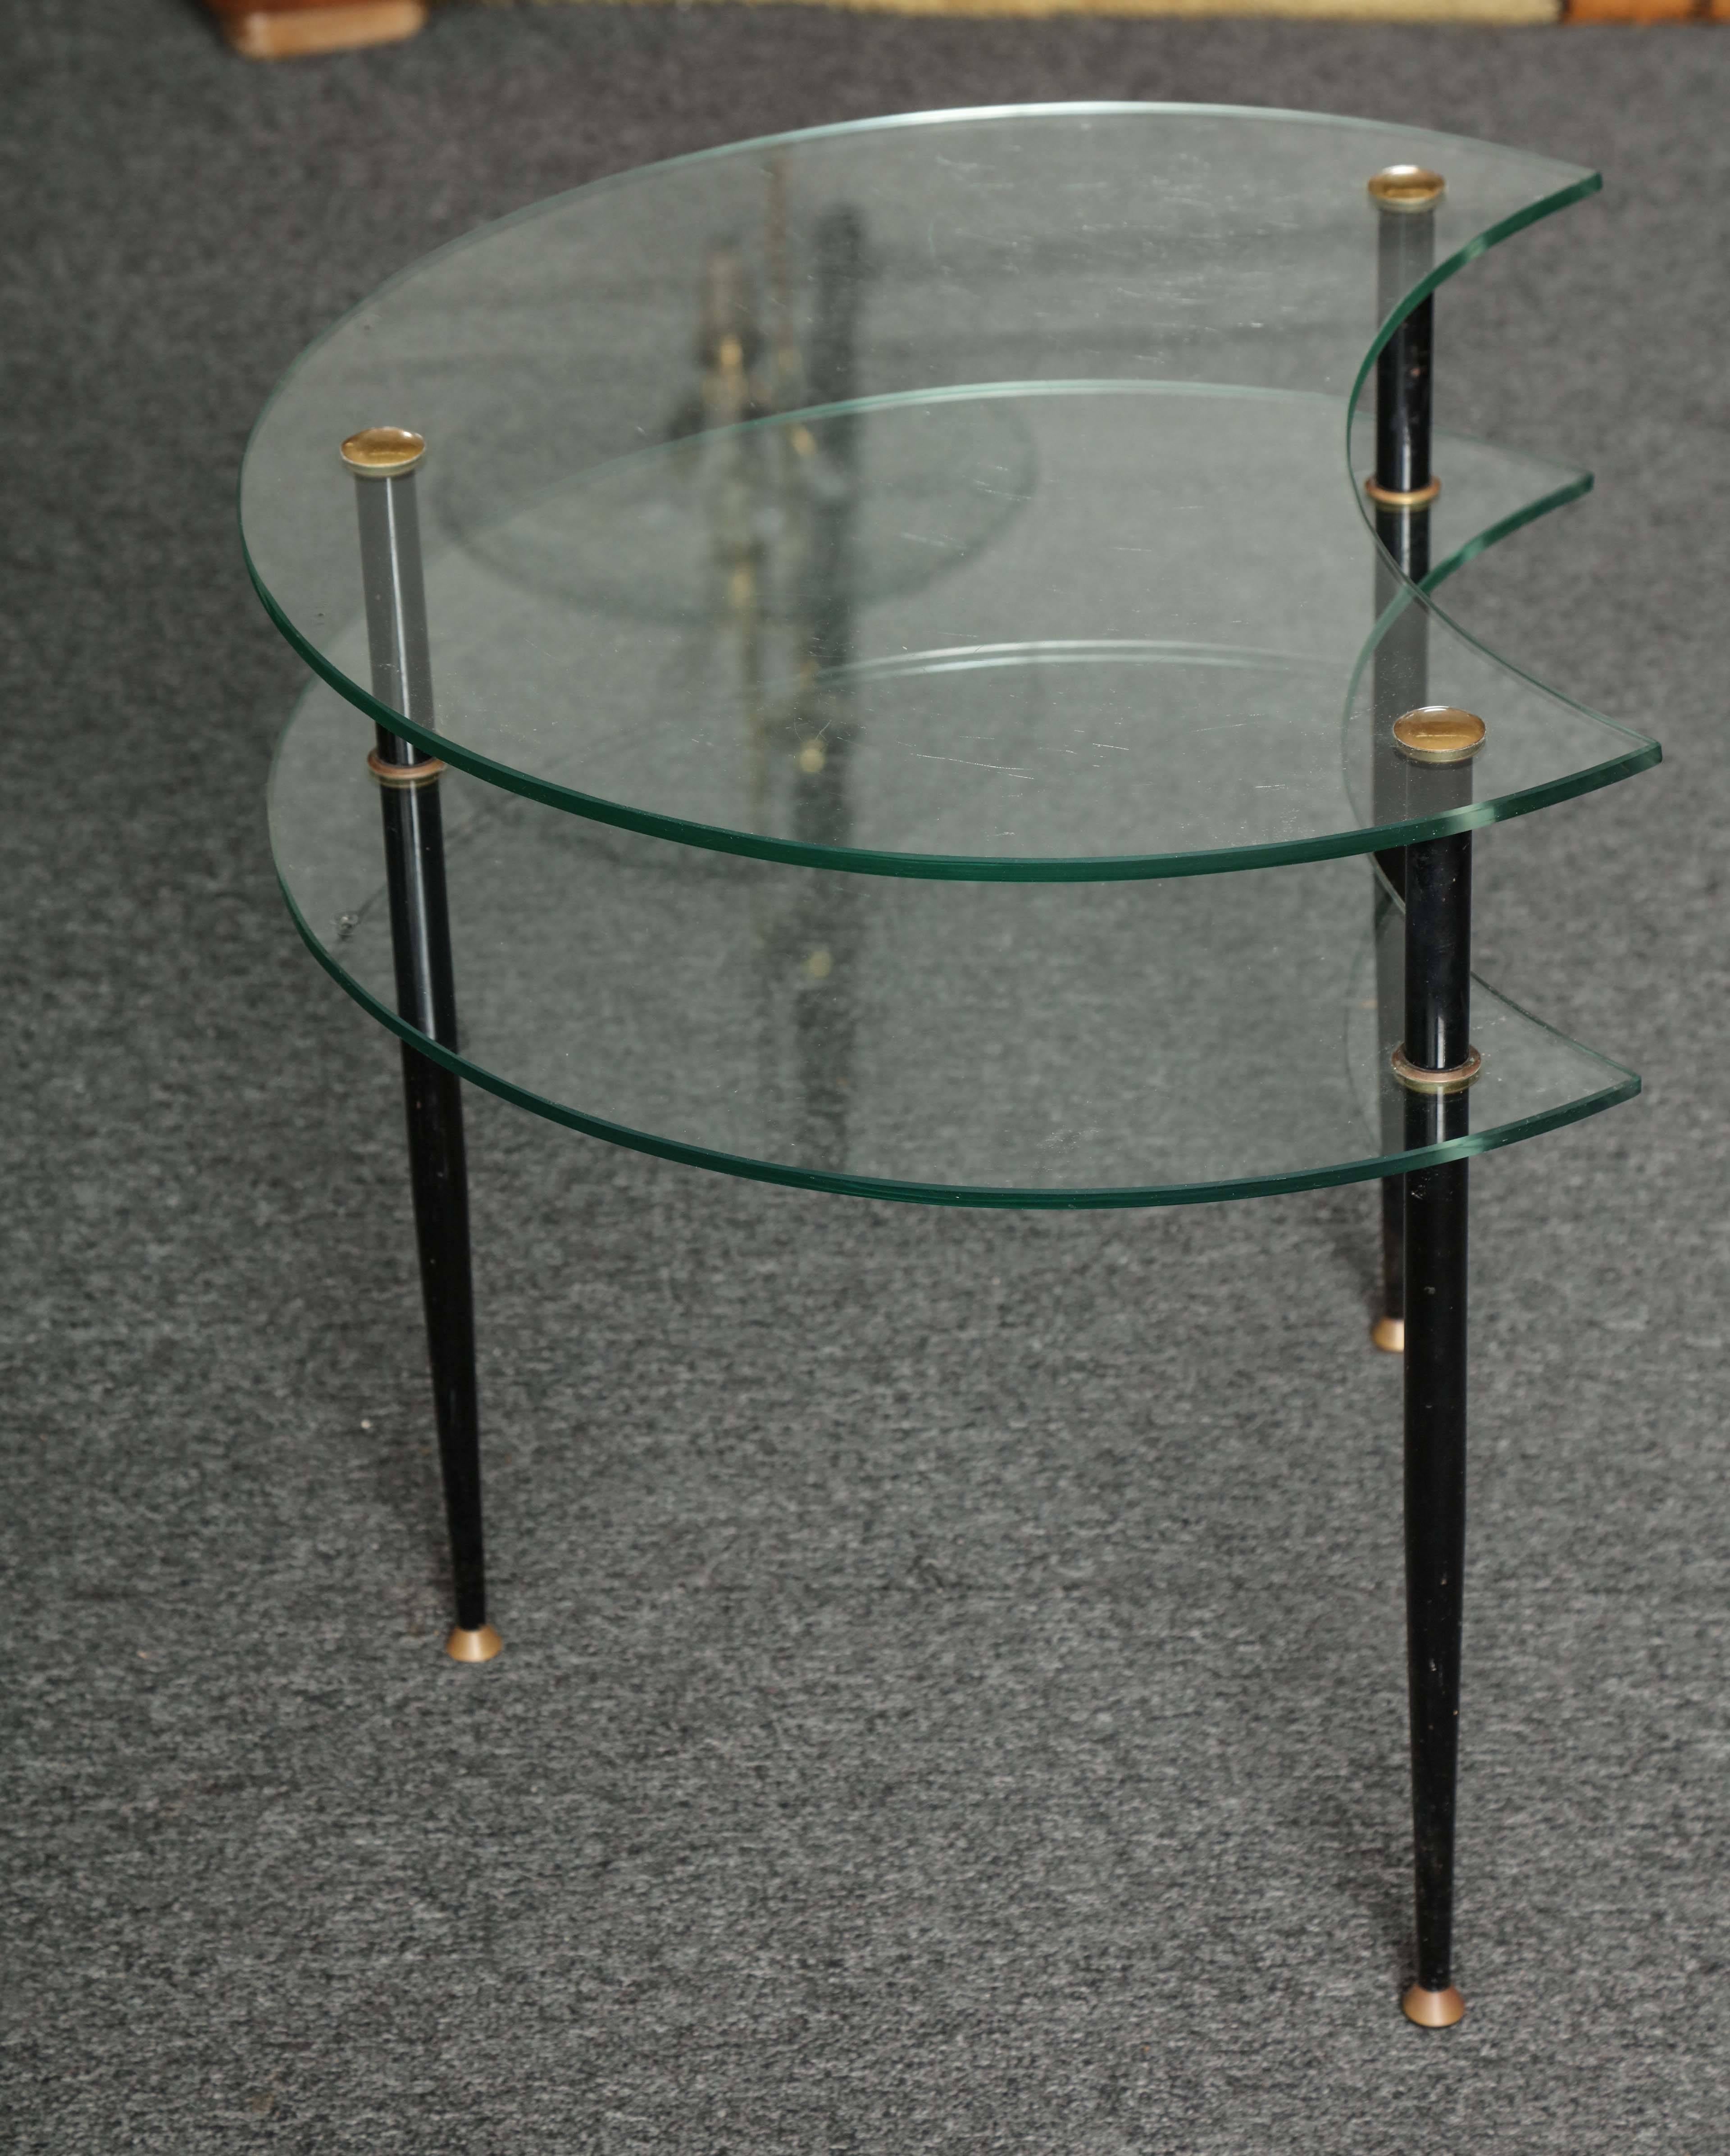 Stylish side table made in Milan, 1960 by Vitrex, designed by Eduardo Paoli, two crescent shaped shelves on three black enameled and brass legs, unusual.
 